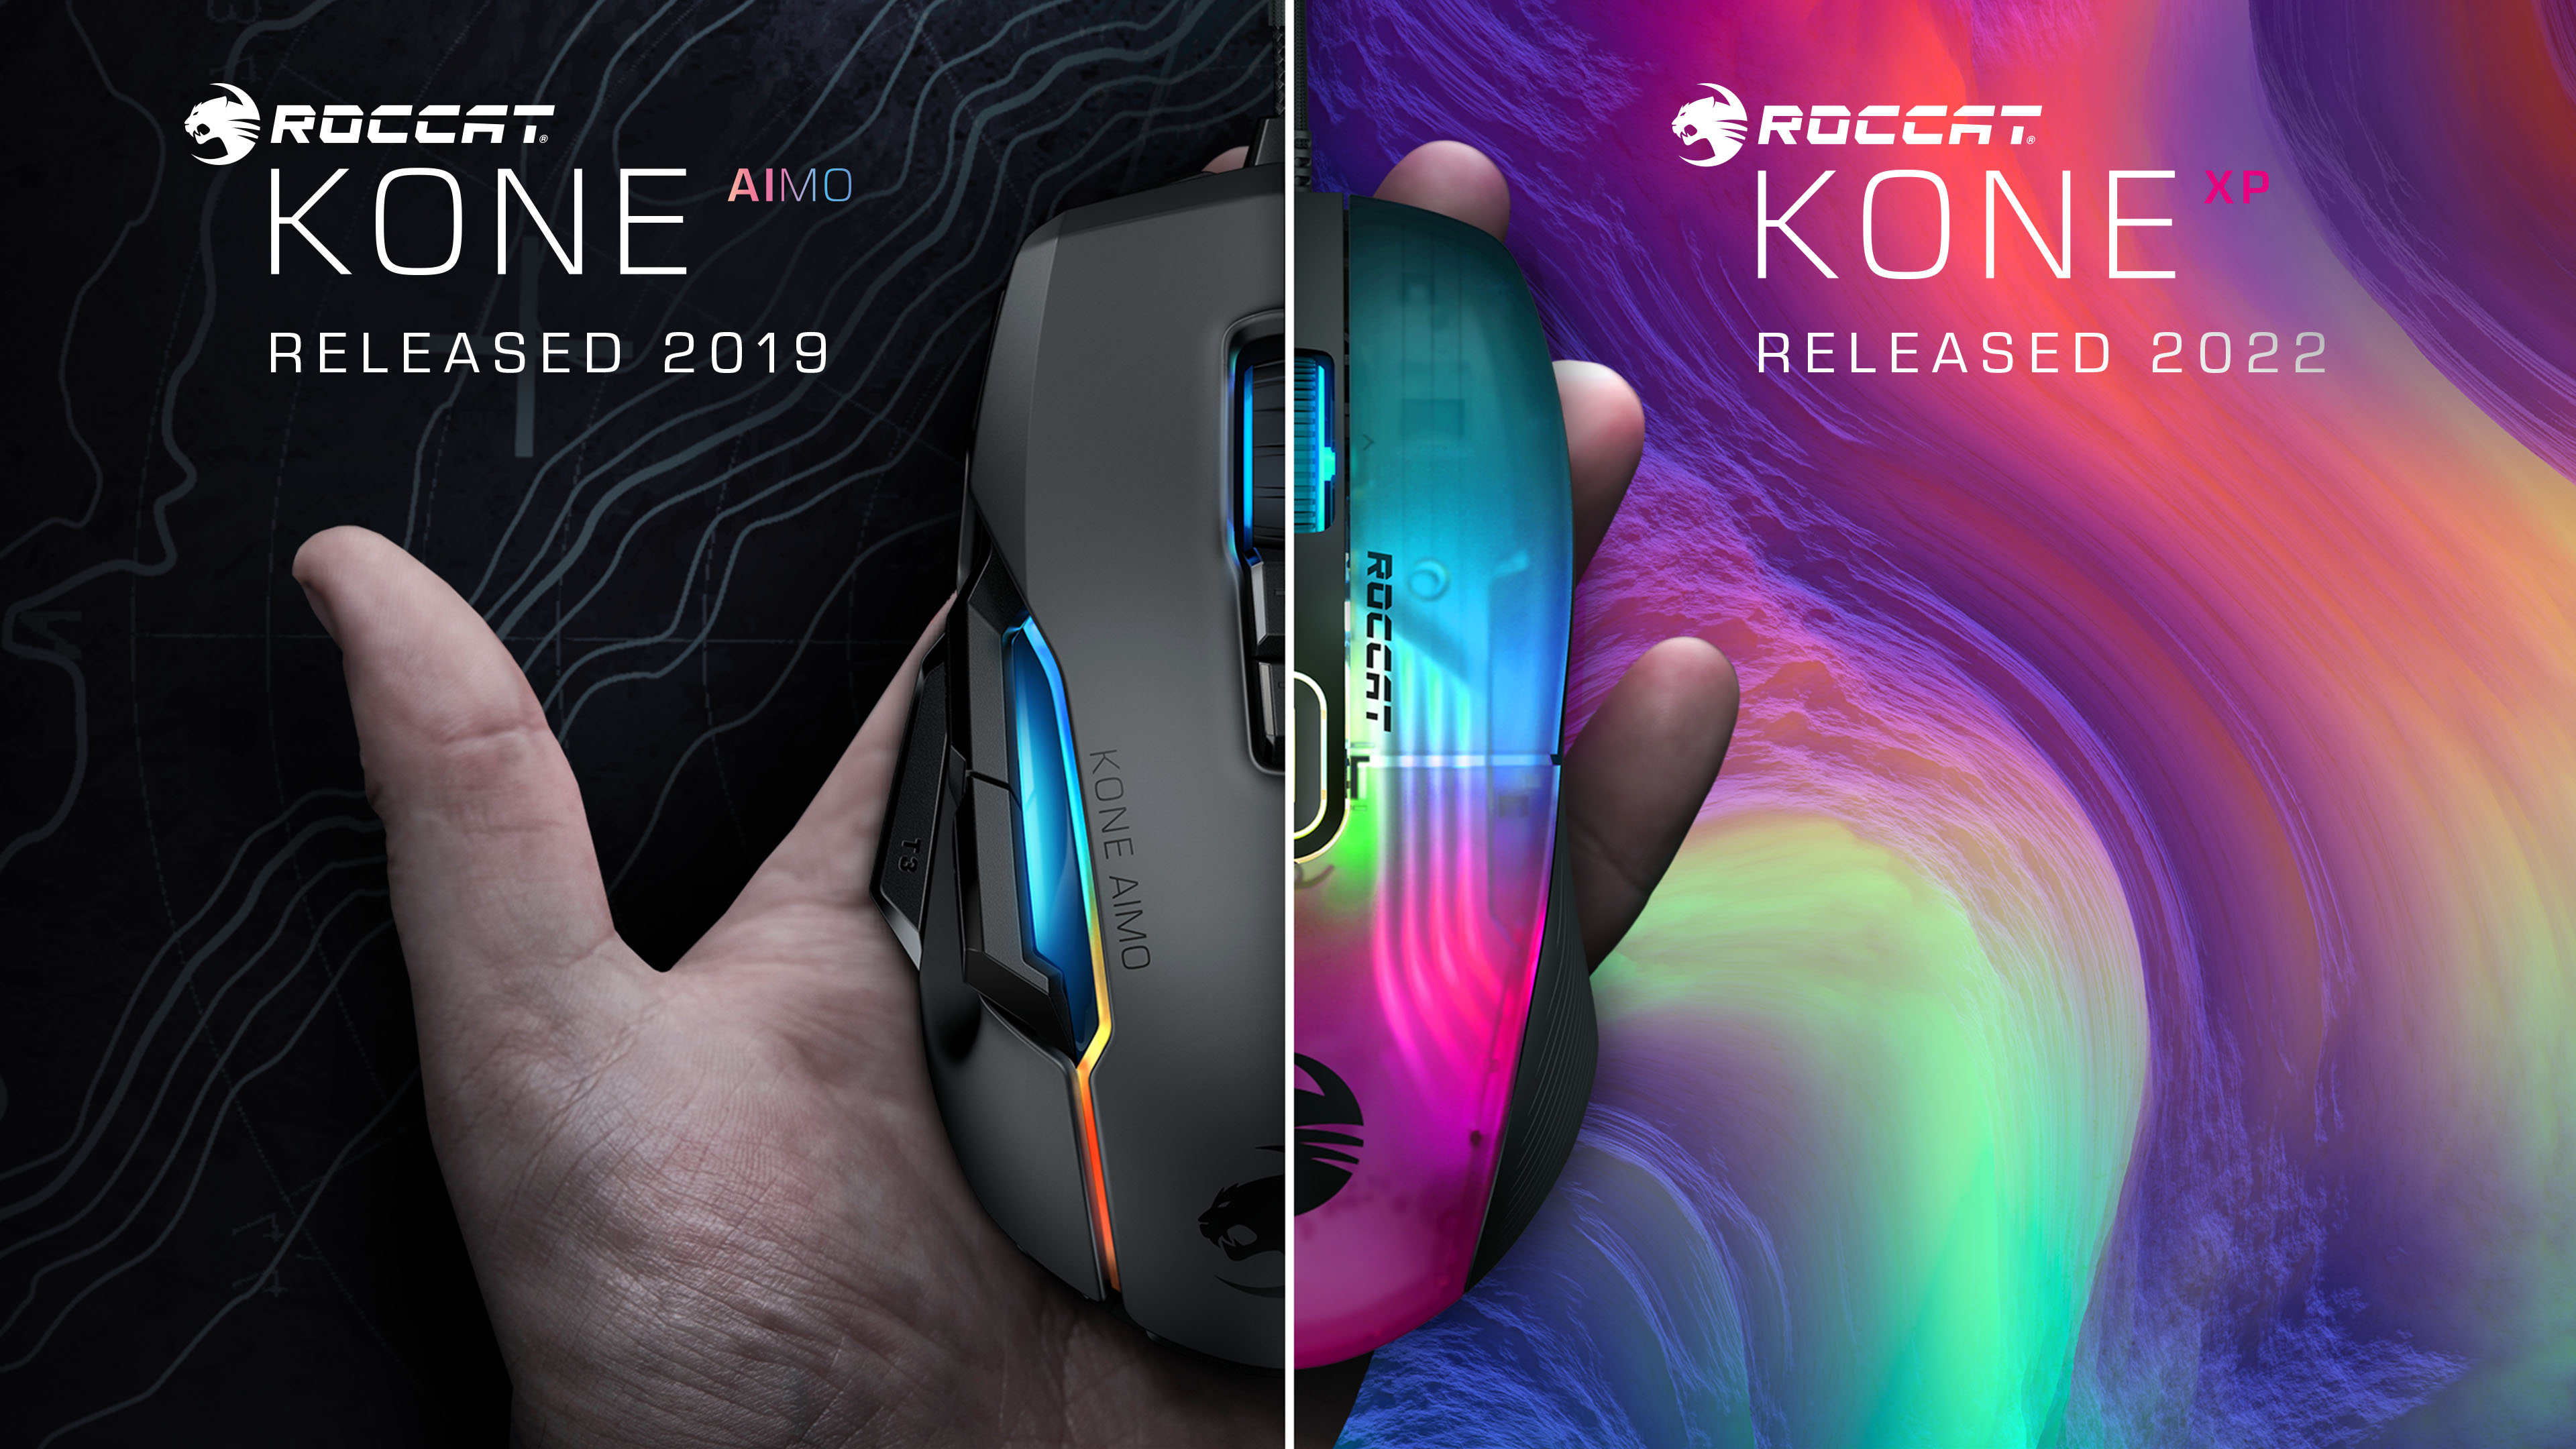 XP ROCCAT\'s Specs Ergonomic All-New Business Lighting the Wire Refines Design RGB | Fan-Favorite Stunning Kone Brand\'s Top 3D With Mouse &